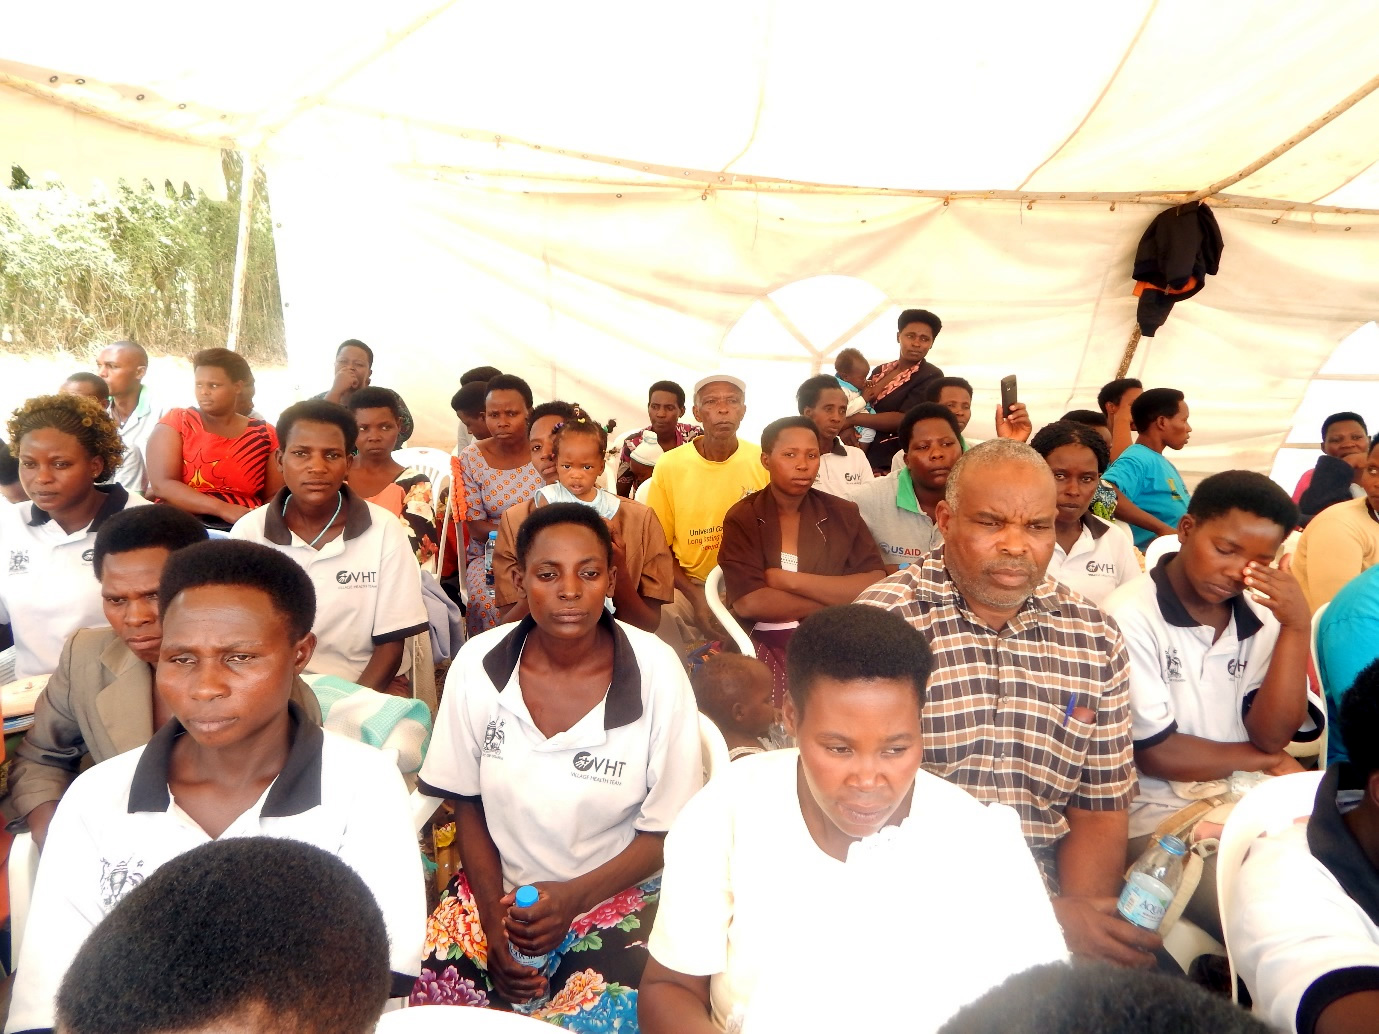 A cross section of members of the Village Health Team attending the function in Ntungamo district.